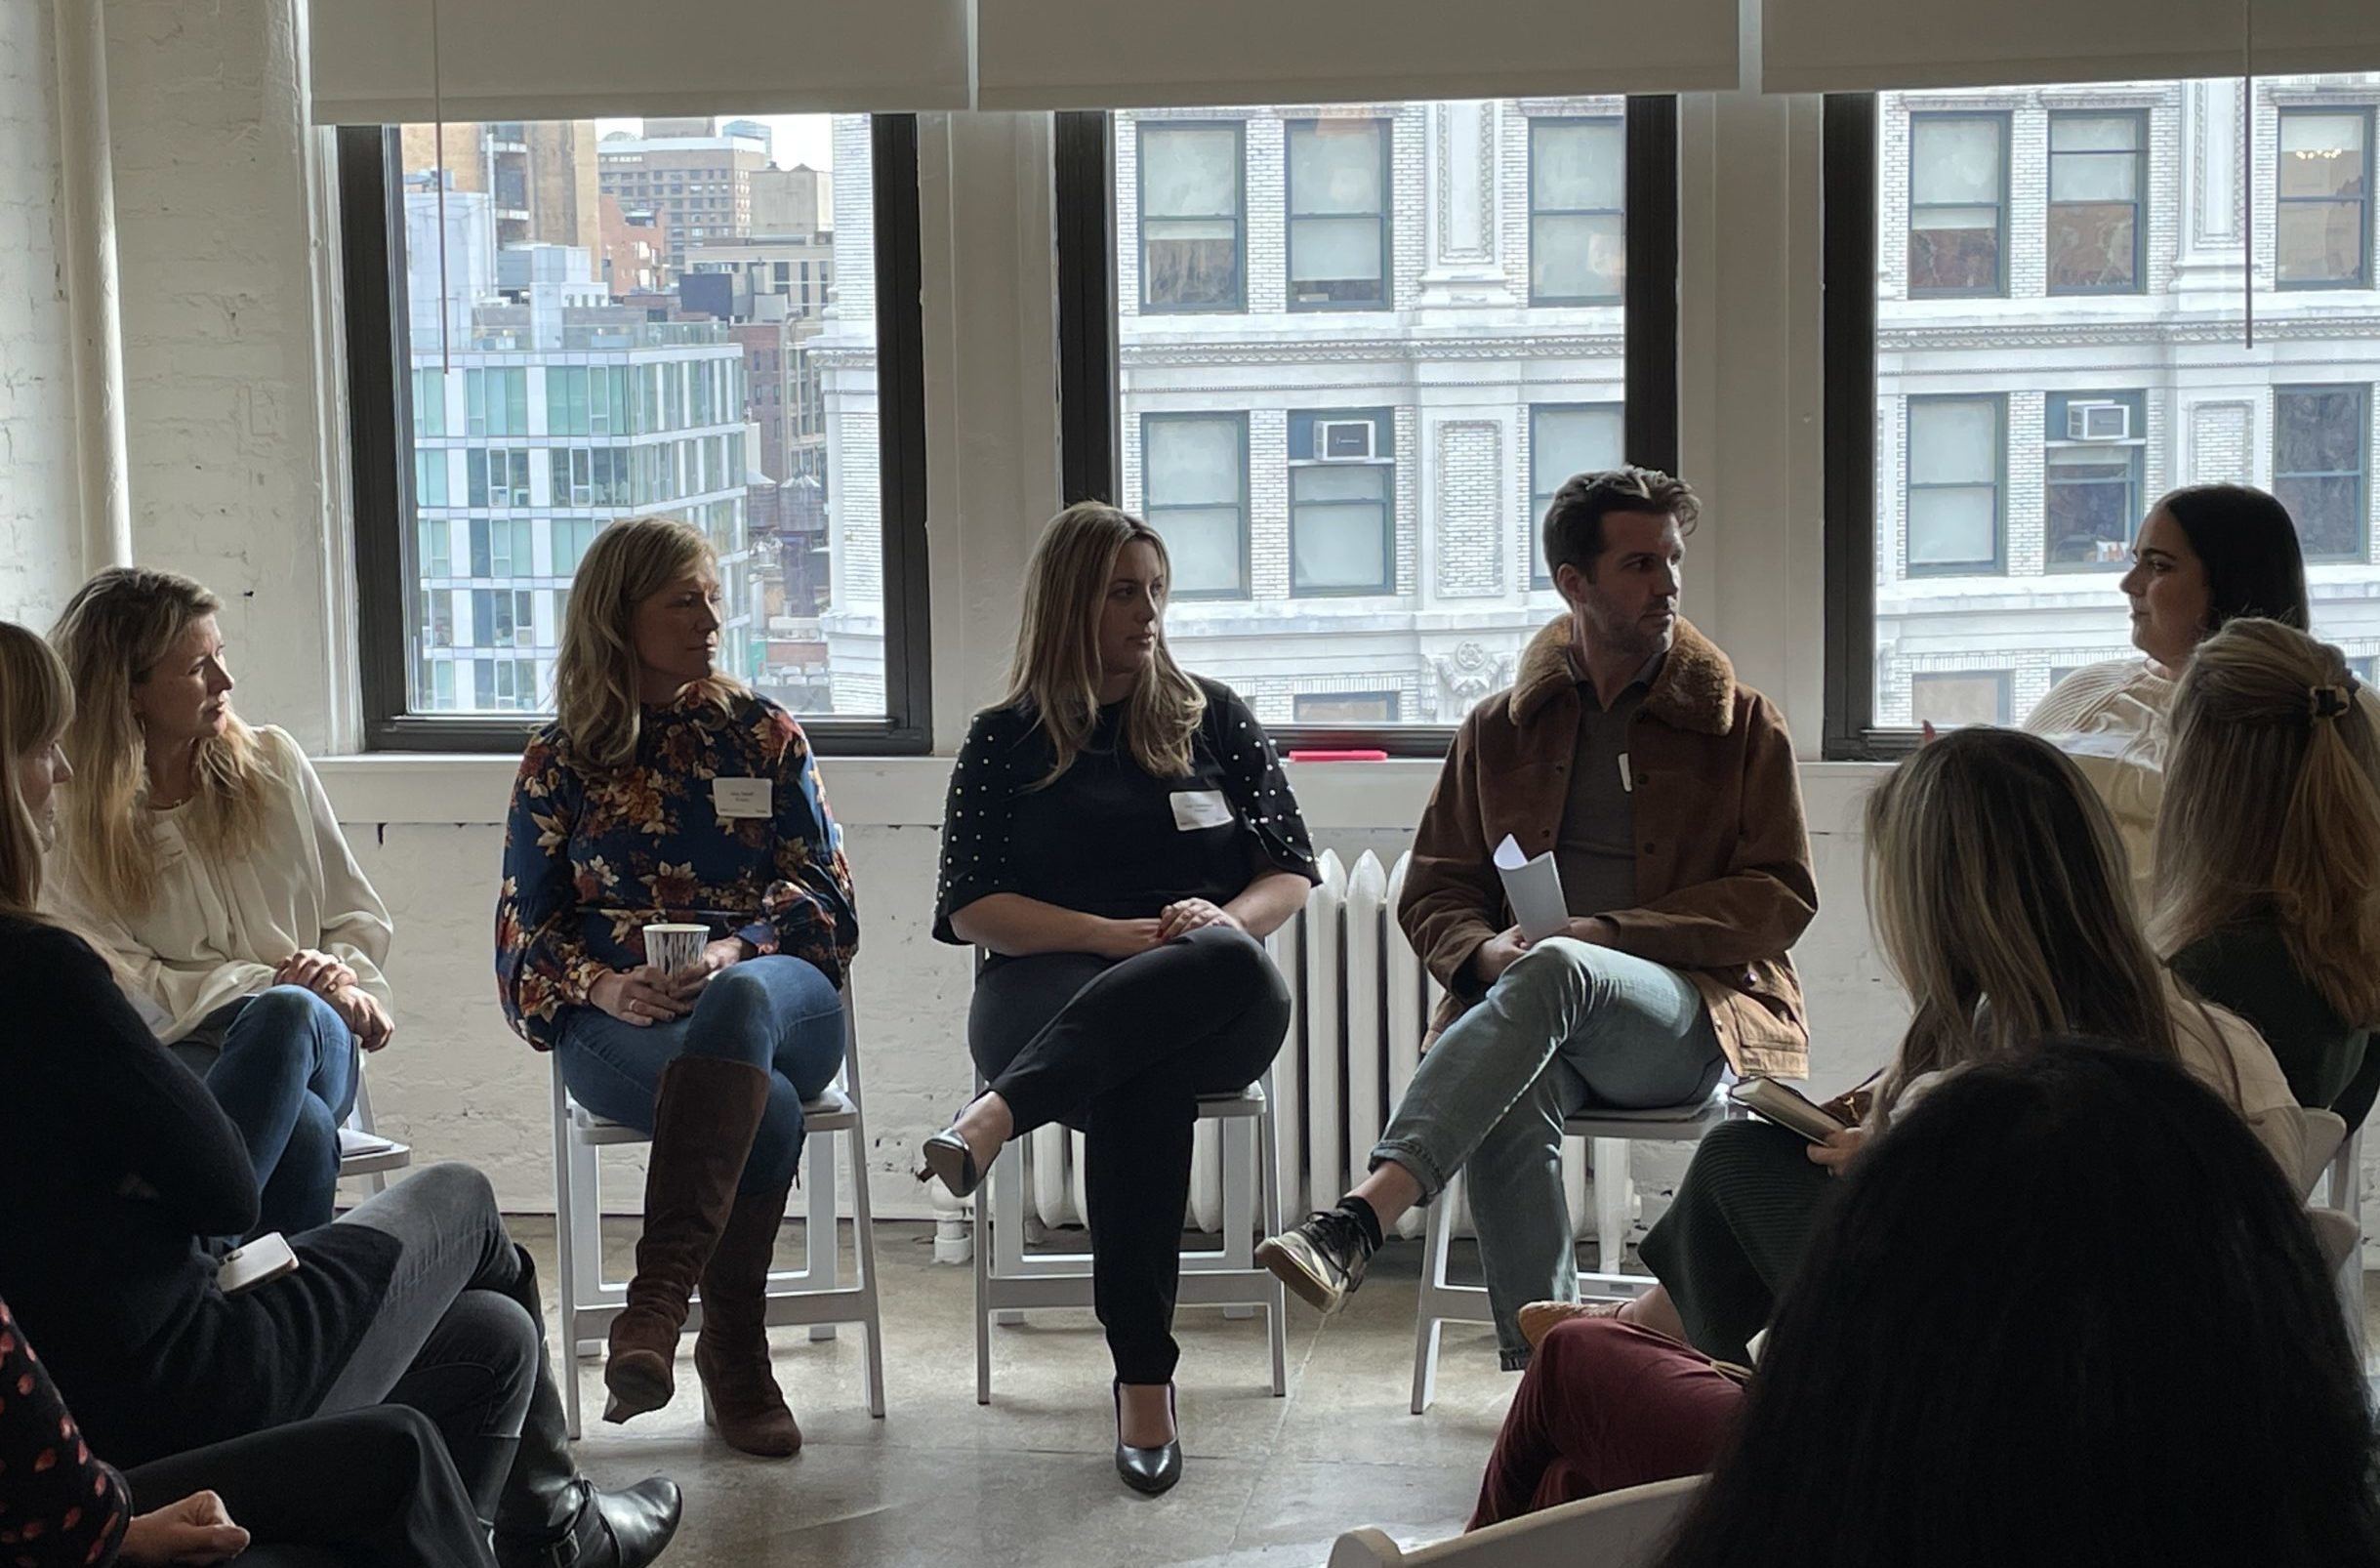 From left: GGV’s Head of Platform Jen Holmstrom with Snappy’s Amy Stoldt and Hani Goldstein, plus Electric’s Ryan Denehy, and Jamie Coakley